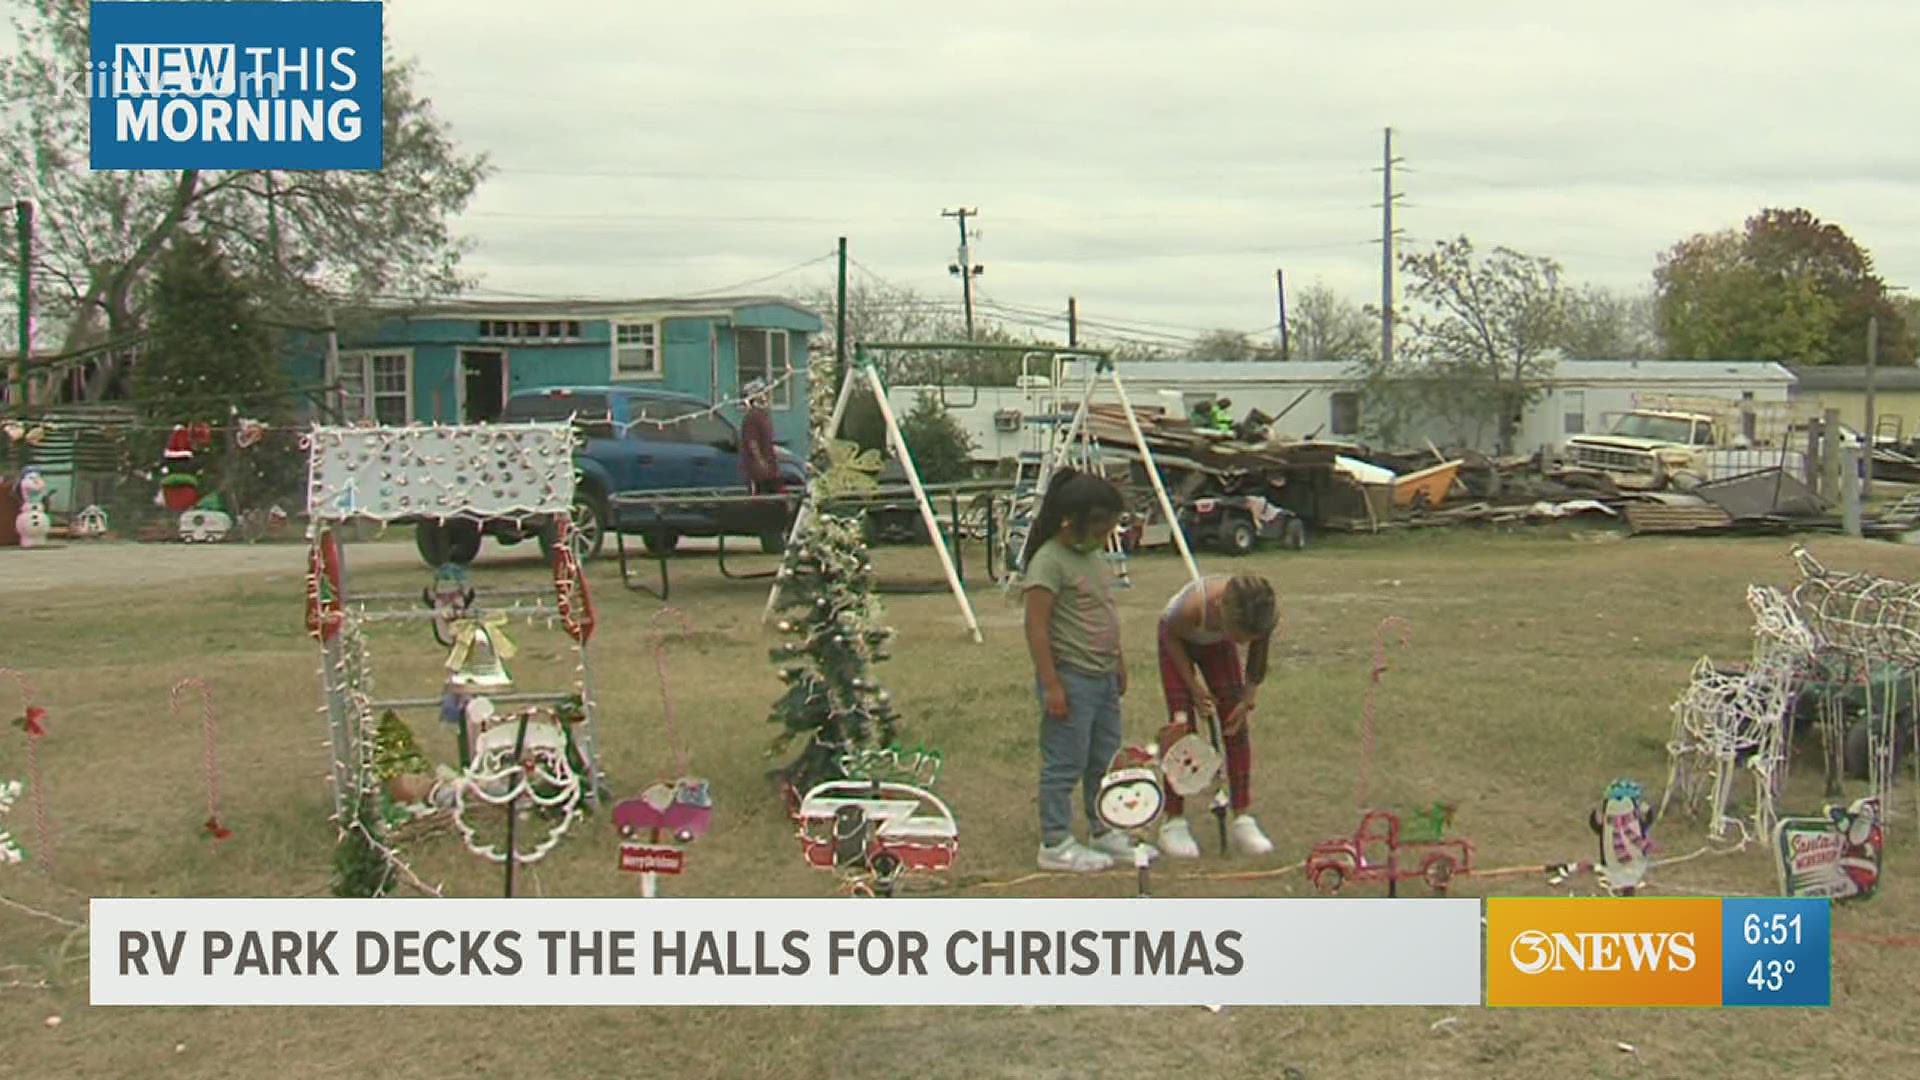 In a small RV park just off of Highway 77, several families are trying to build up the Christmas spirit.